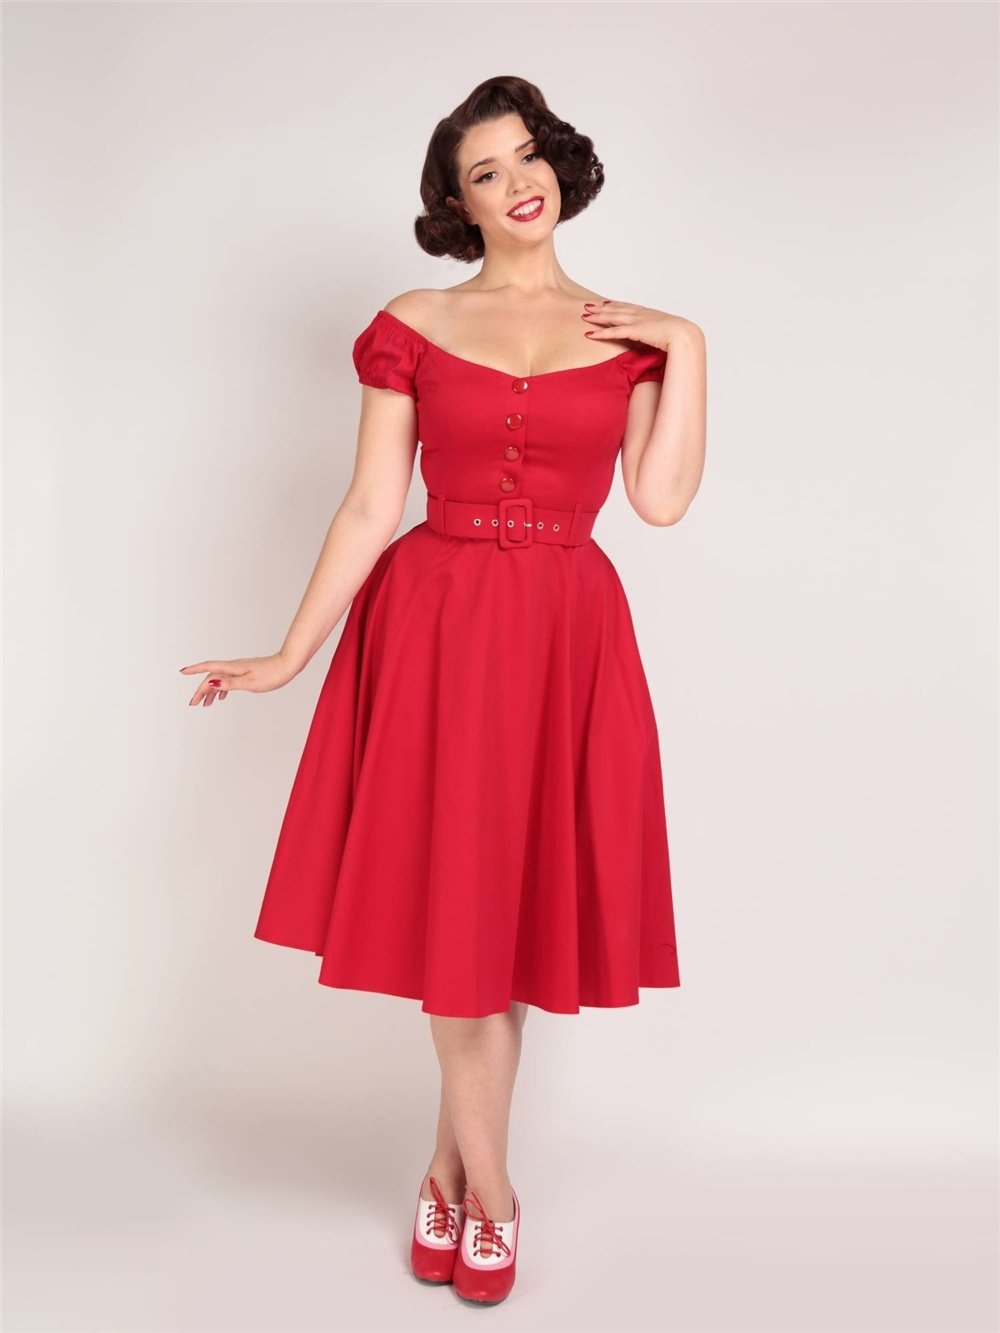 Blanche Swing Dress In Red Collectif Pinup Retro Vintage - Kitsch'n Swell